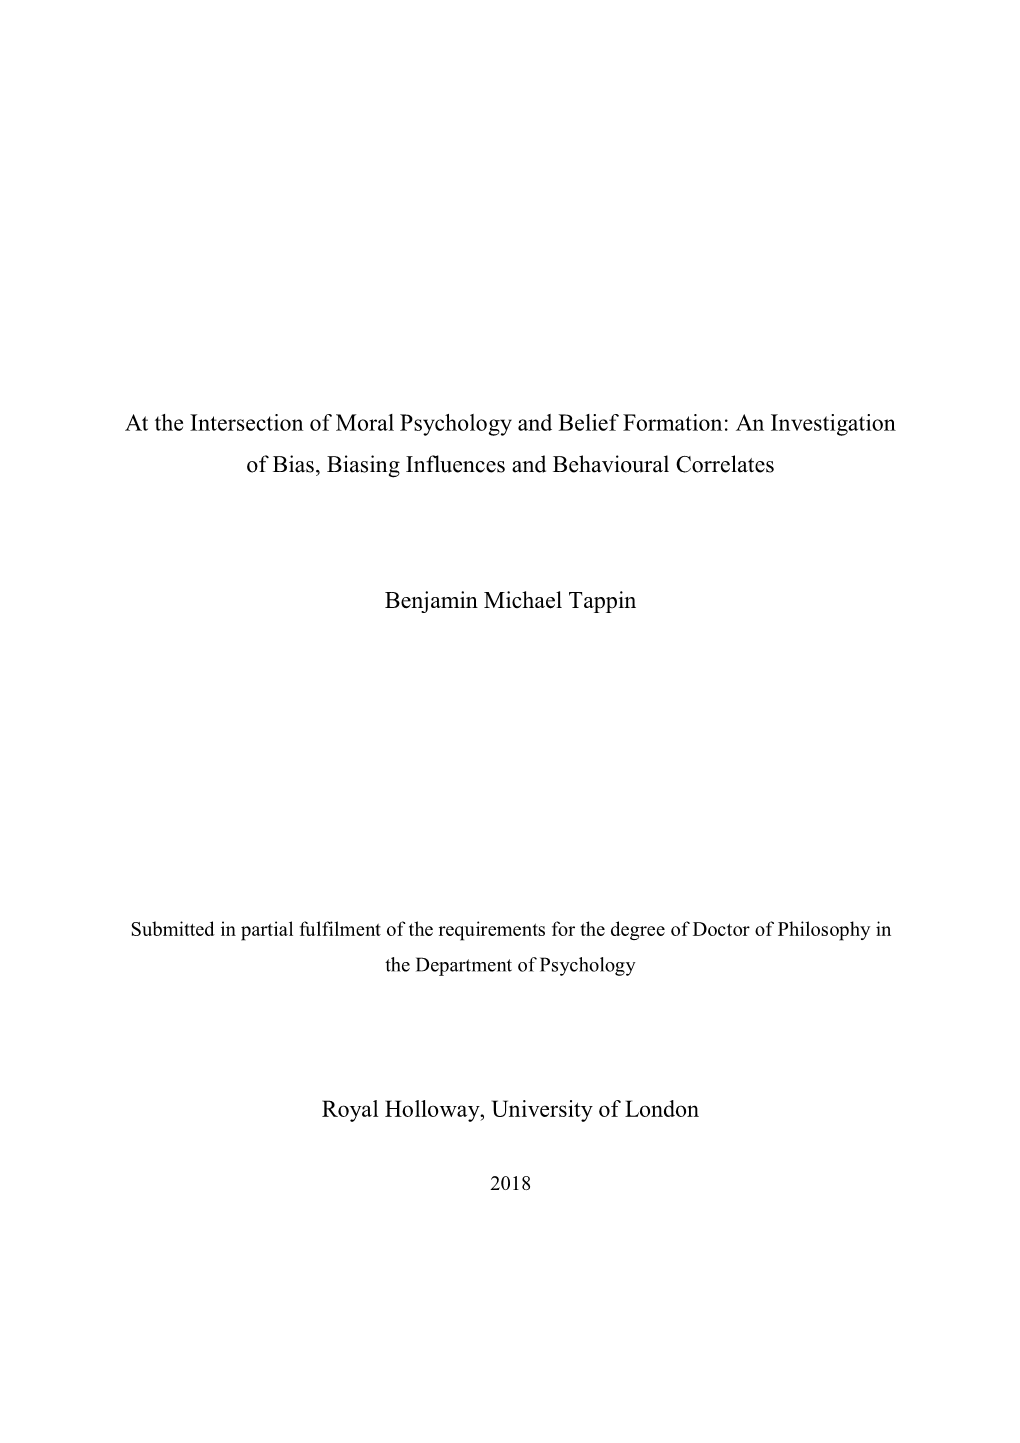 At the Intersection of Moral Psychology and Belief Formation: an Investigation of Bias, Biasing Influences and Behavioural Correlates